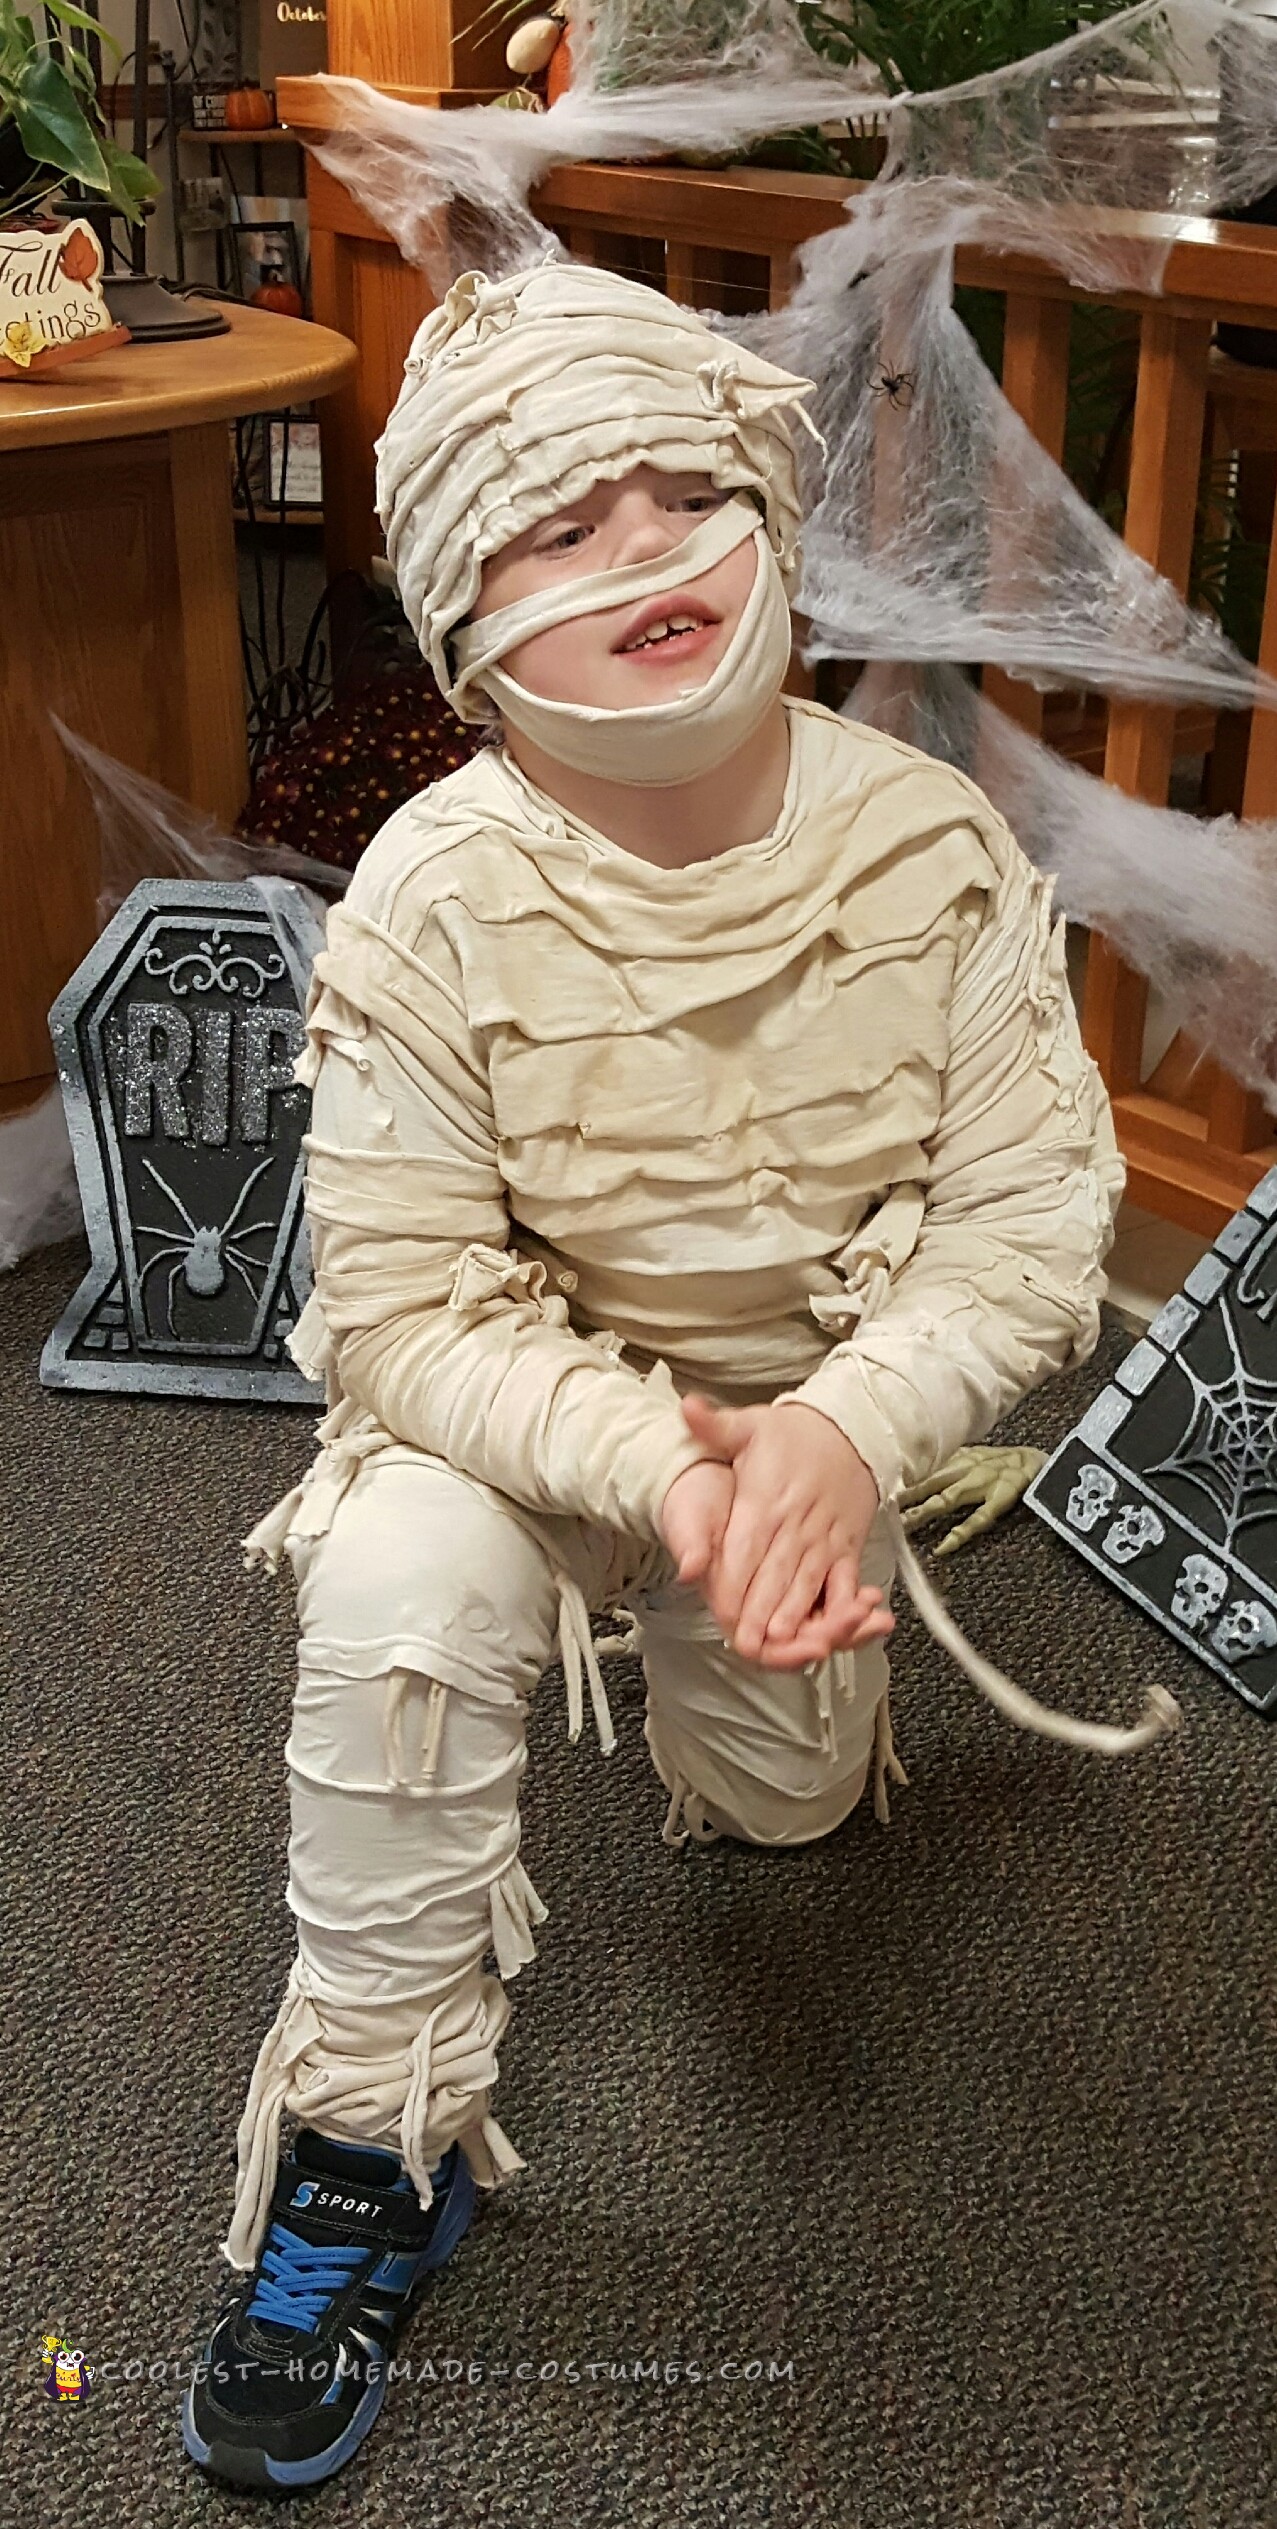 Best DIY Mummy Costume for a Boy - Last Minute and Easy!